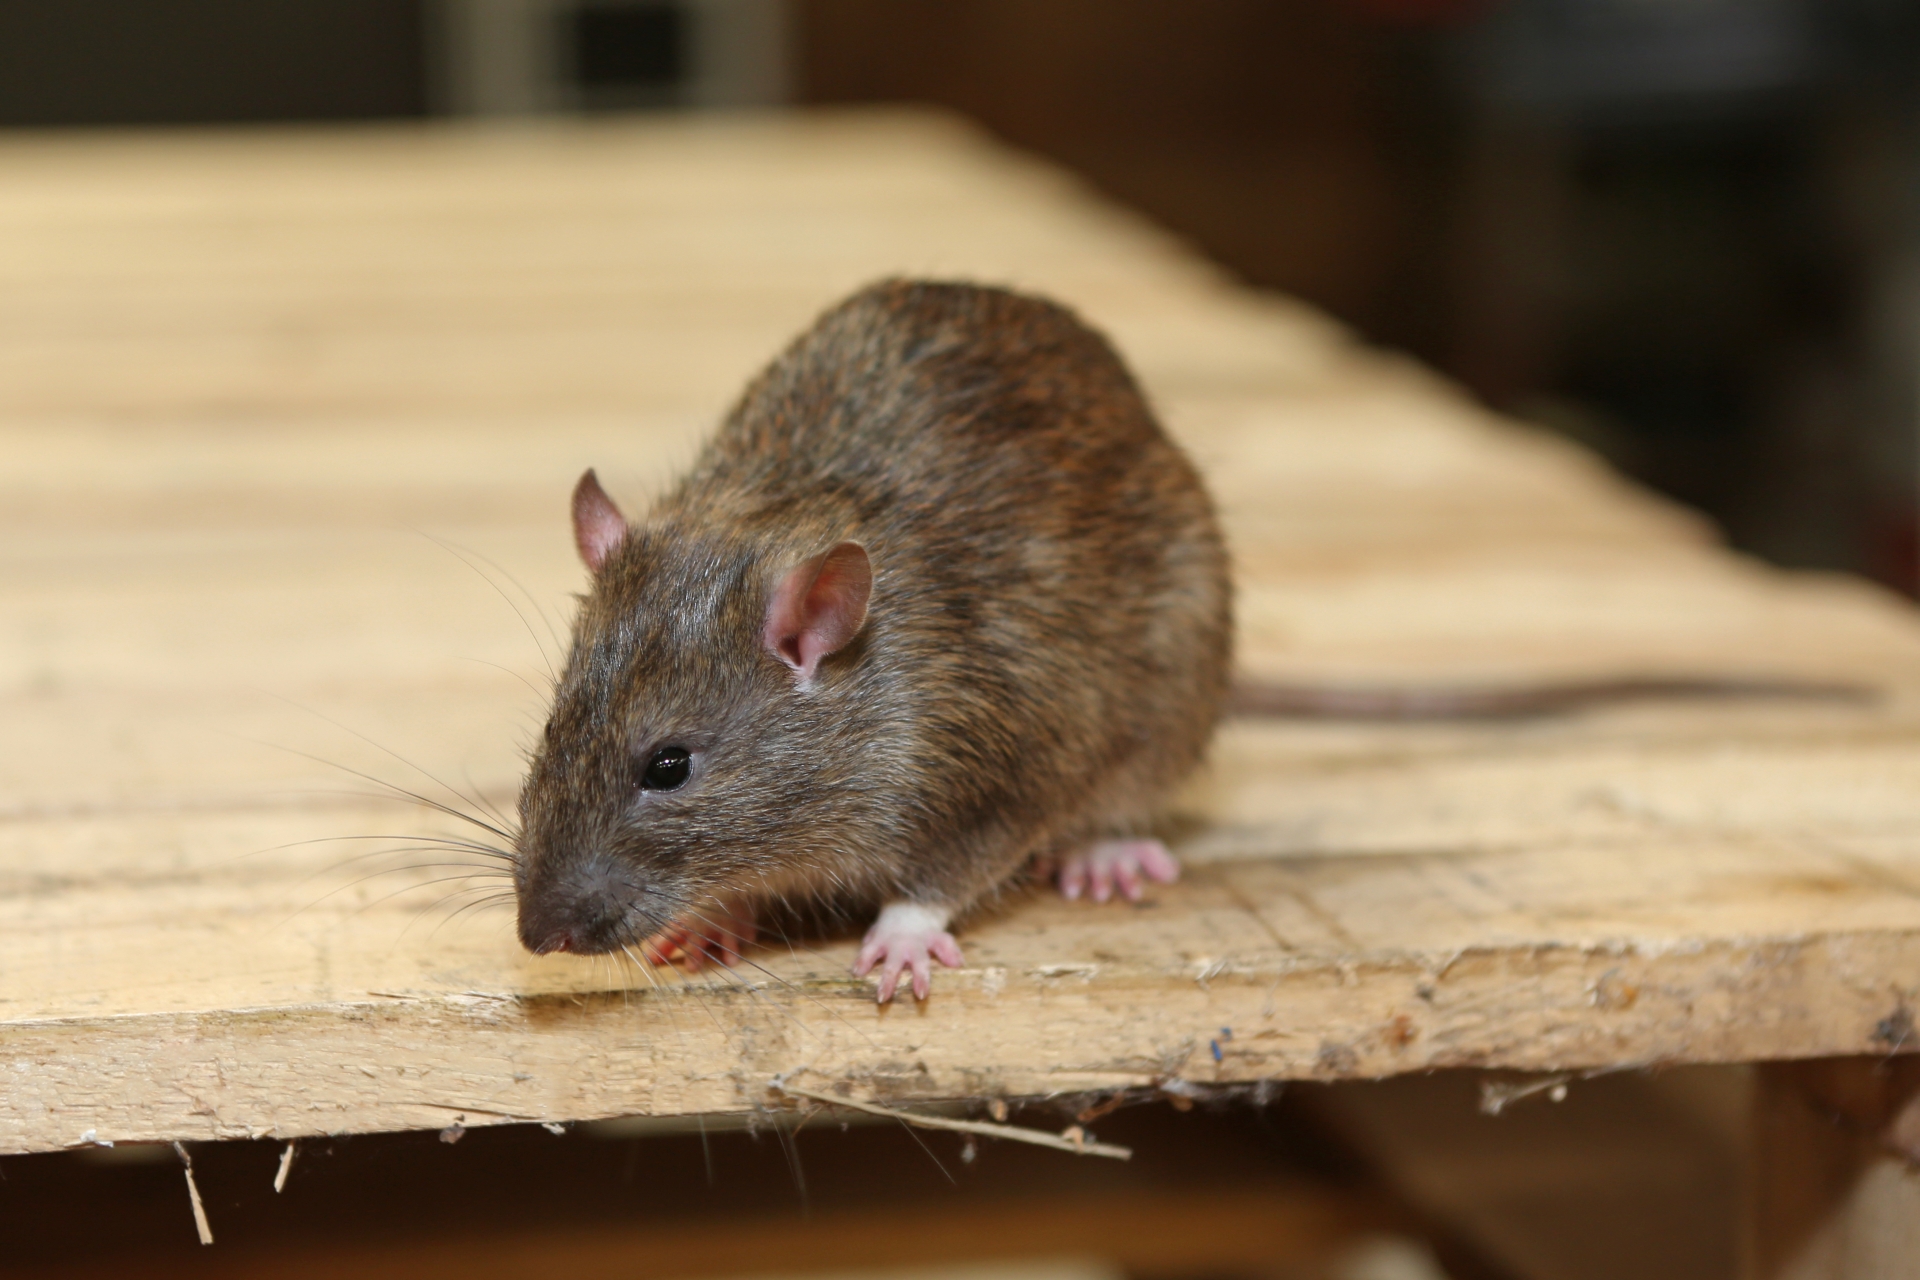 Rat extermination, Pest Control in Chertsey, Ottershaw, Longcross, KT16. Call Now 020 8166 9746